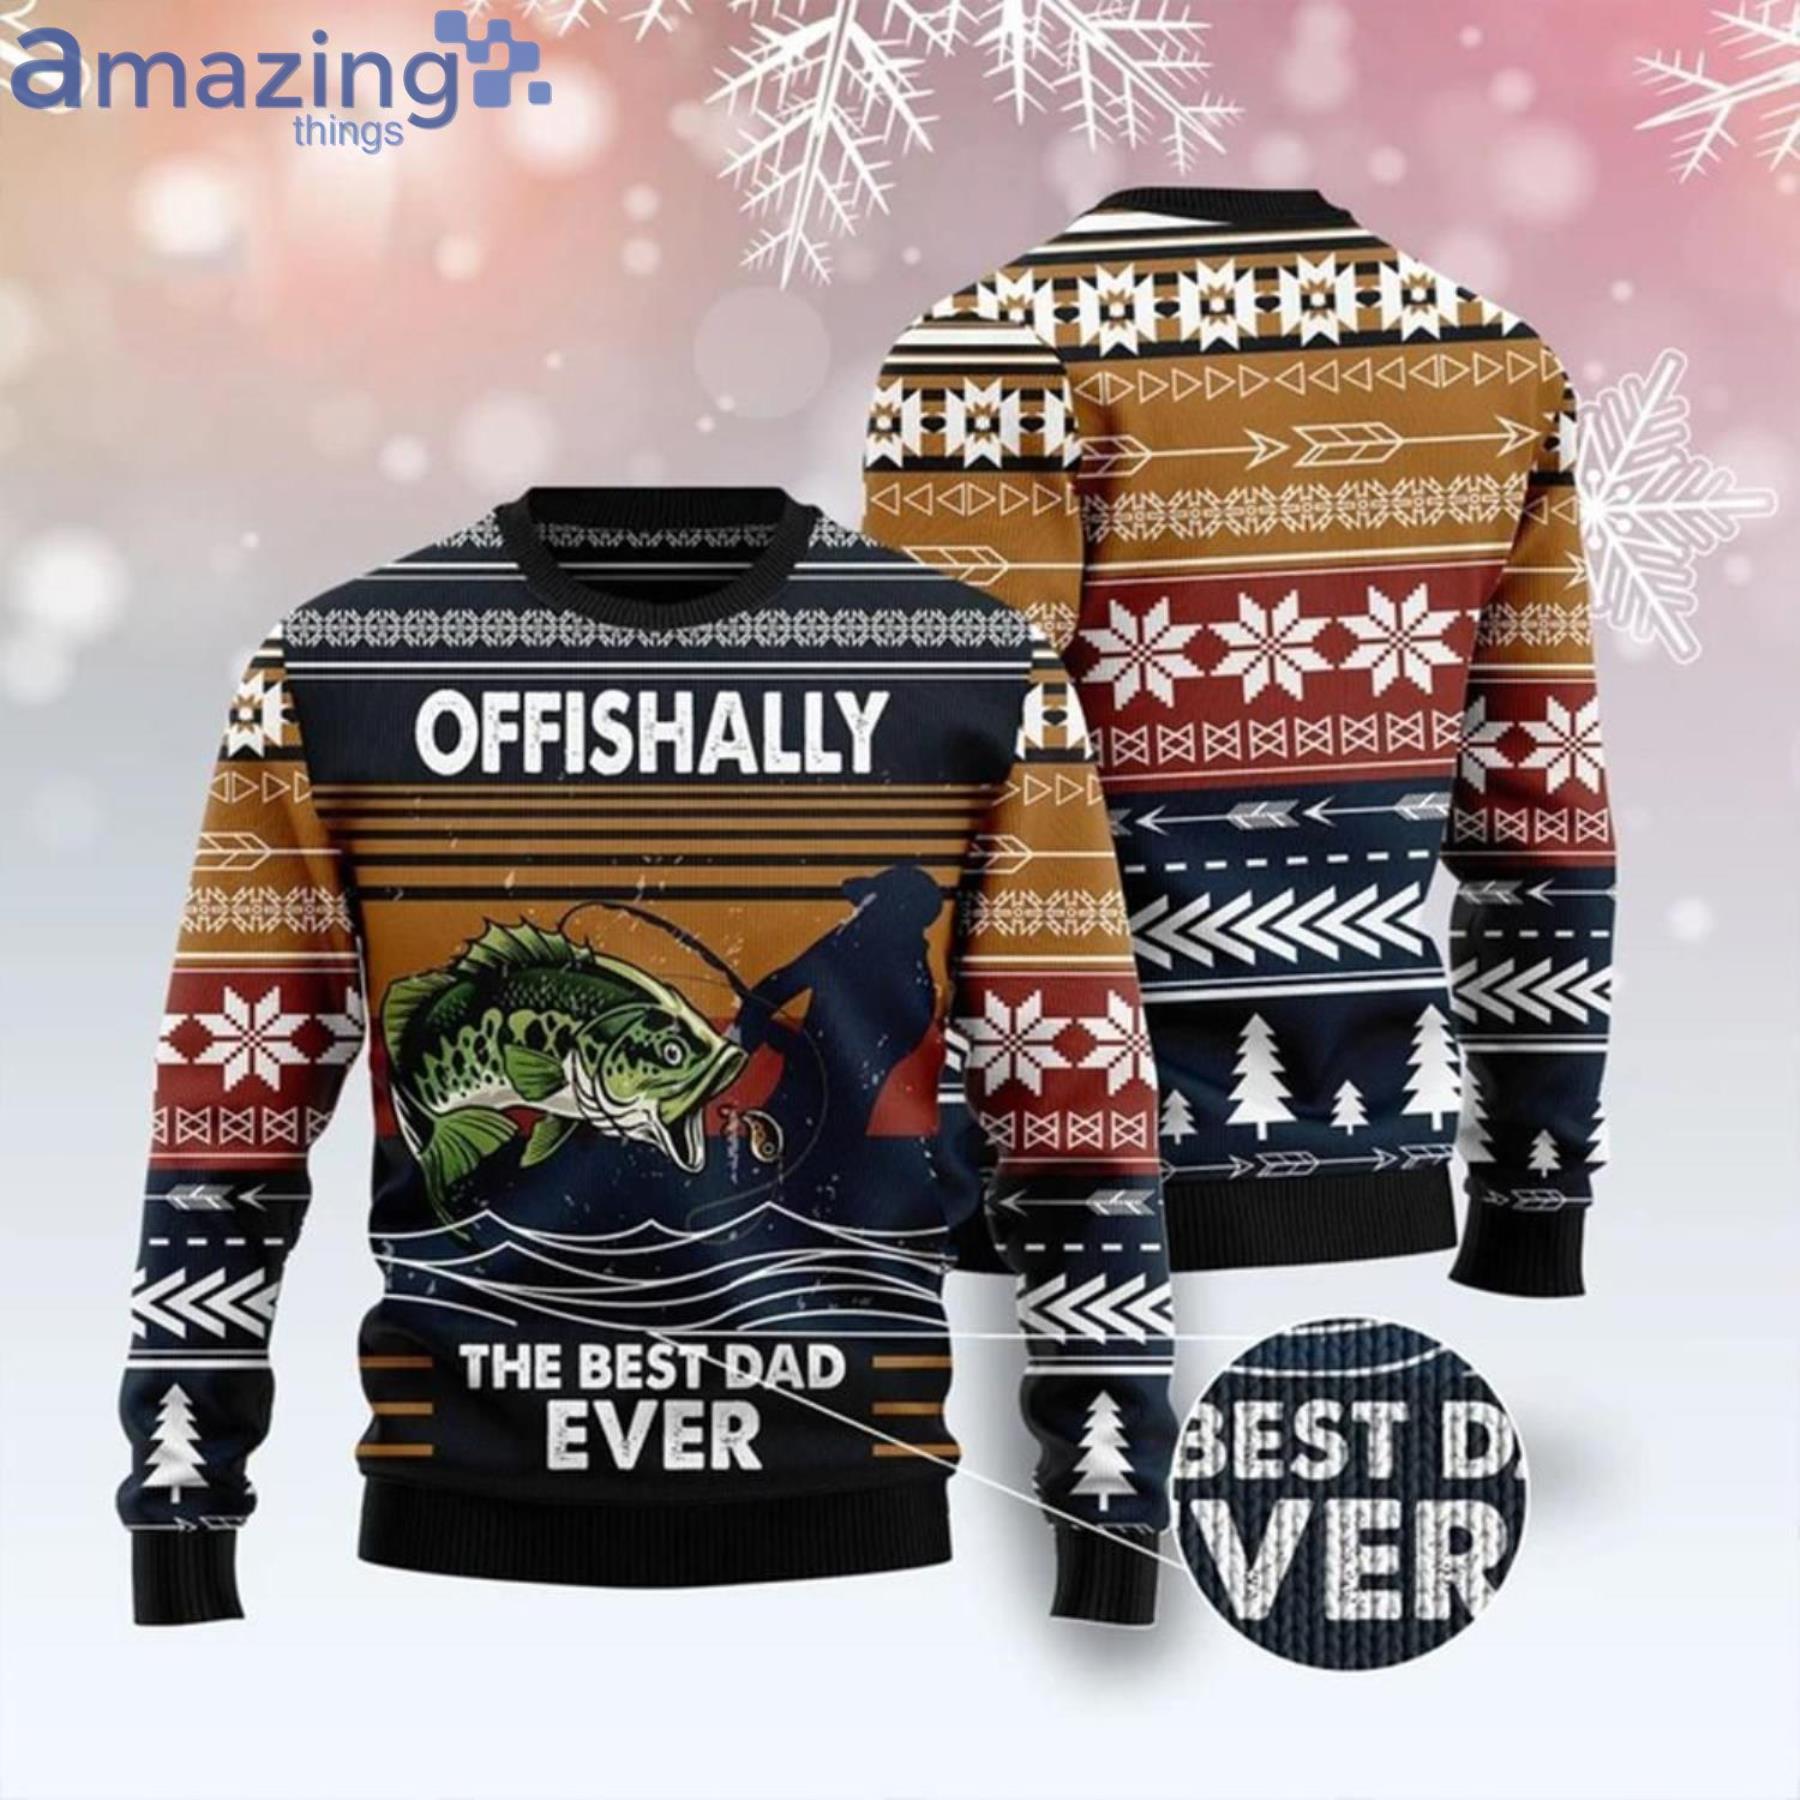 Fishing Offishally The Best Eve Retro Vintage Ugly Sweater